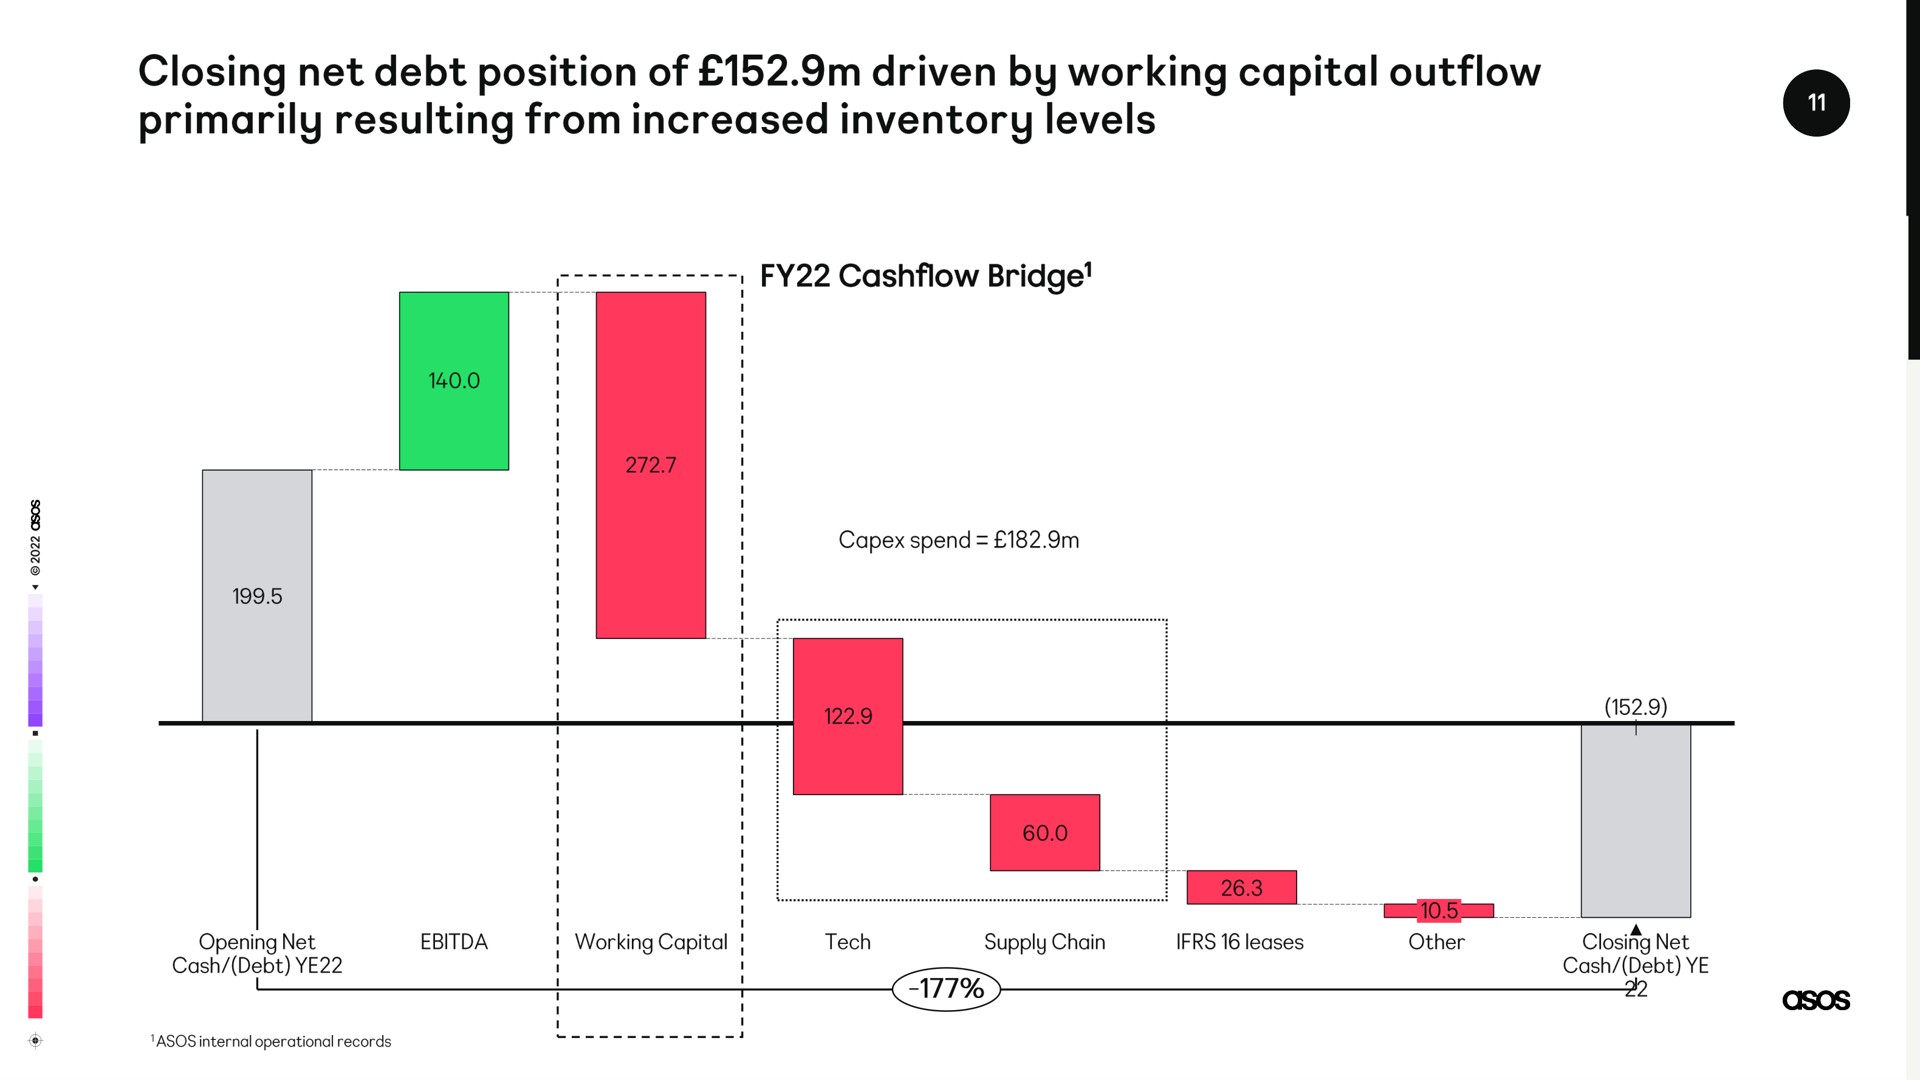 closing net debt position of driven by working capital outflow primarily resulting from increased inventory levels | Asos